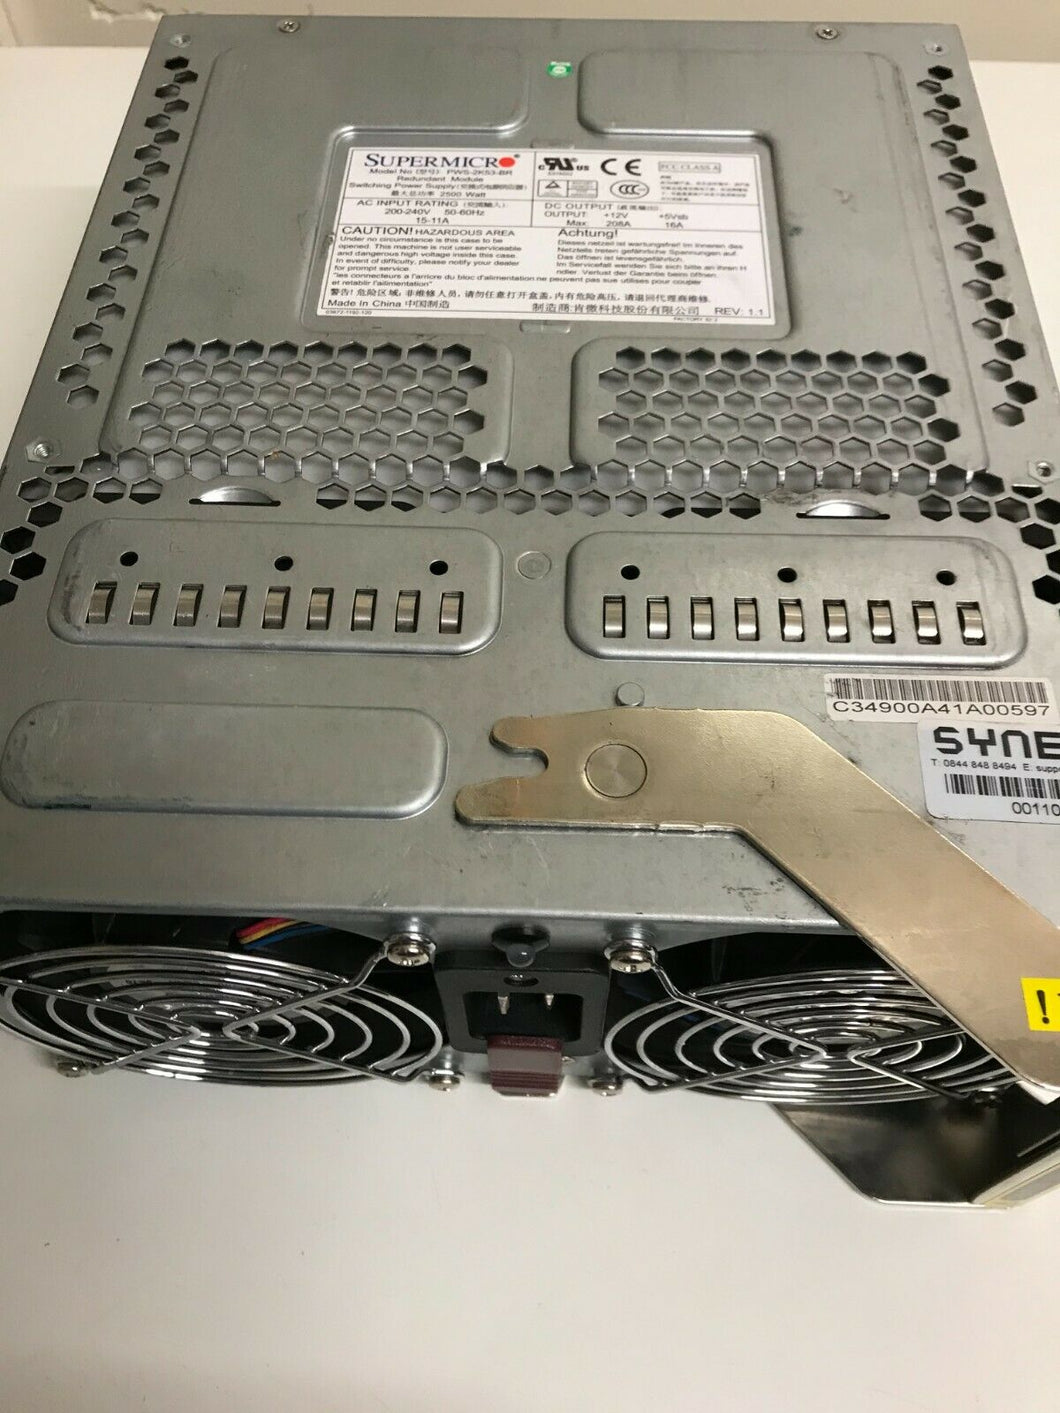 NEW Supermicro PWS-2K53-BR 2500Watts 200-240Volts AC Plug-in Power Supply